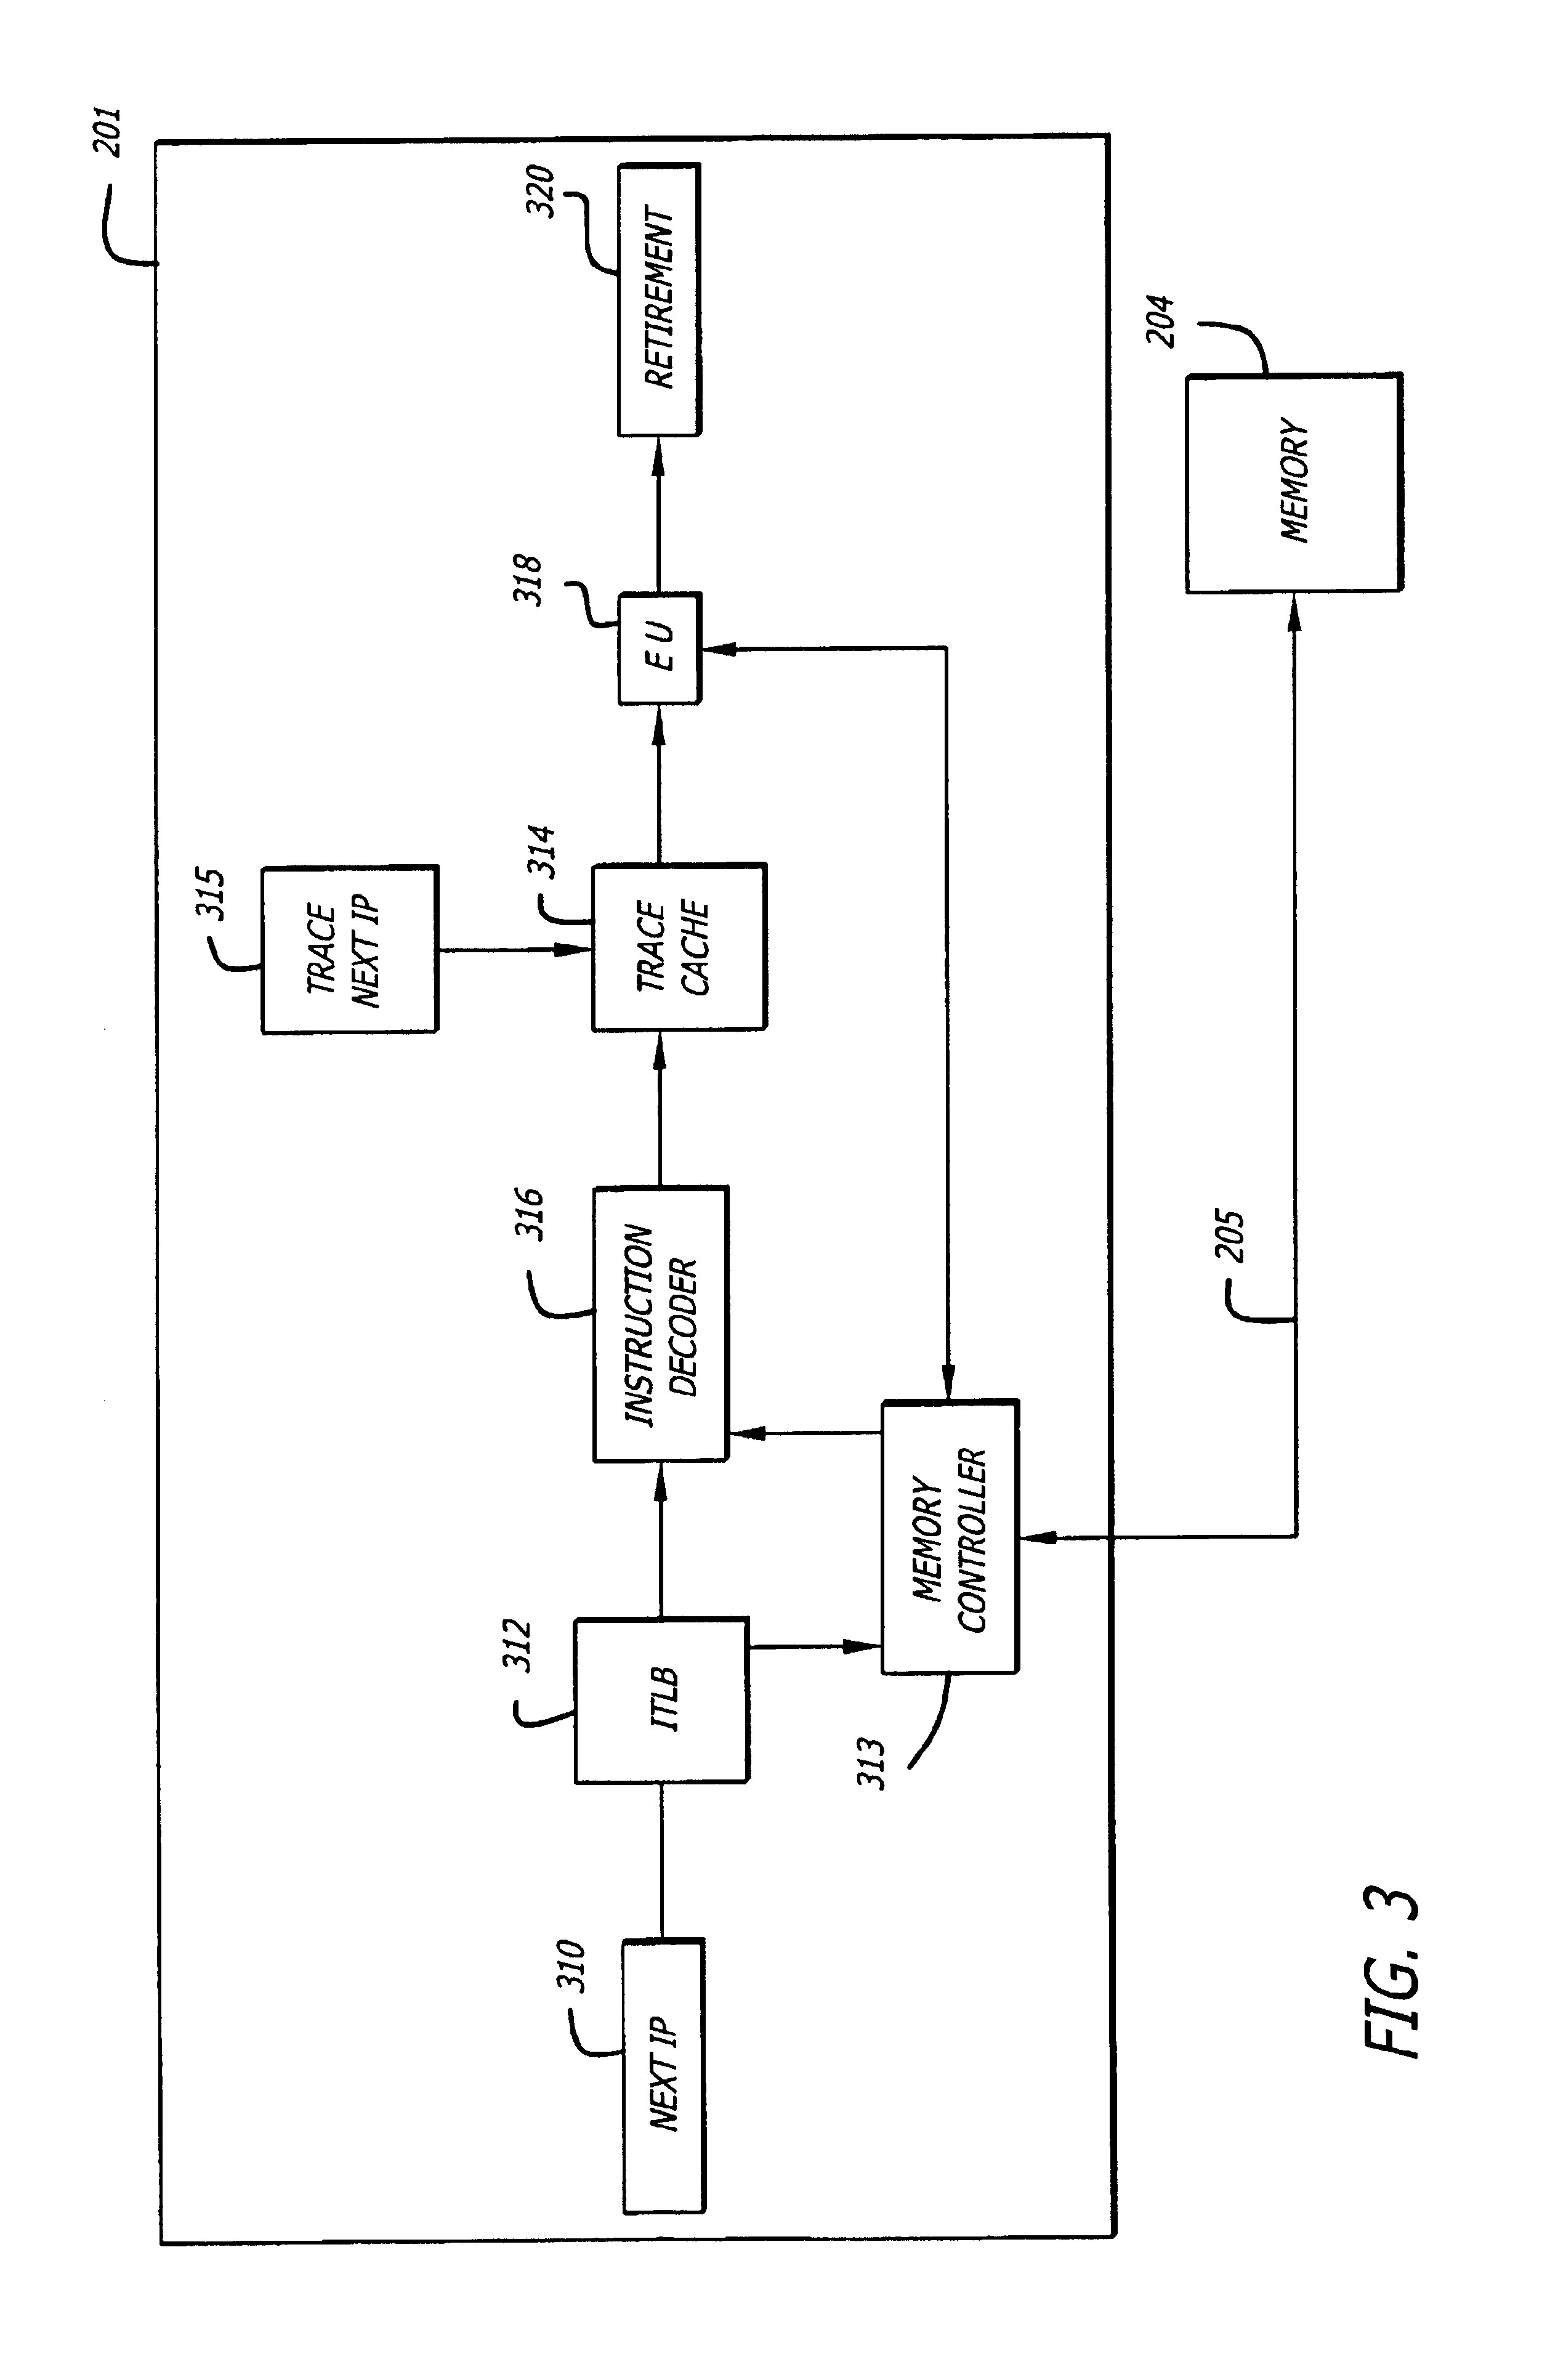 Pipelined instruction decoder for multi-threaded processors